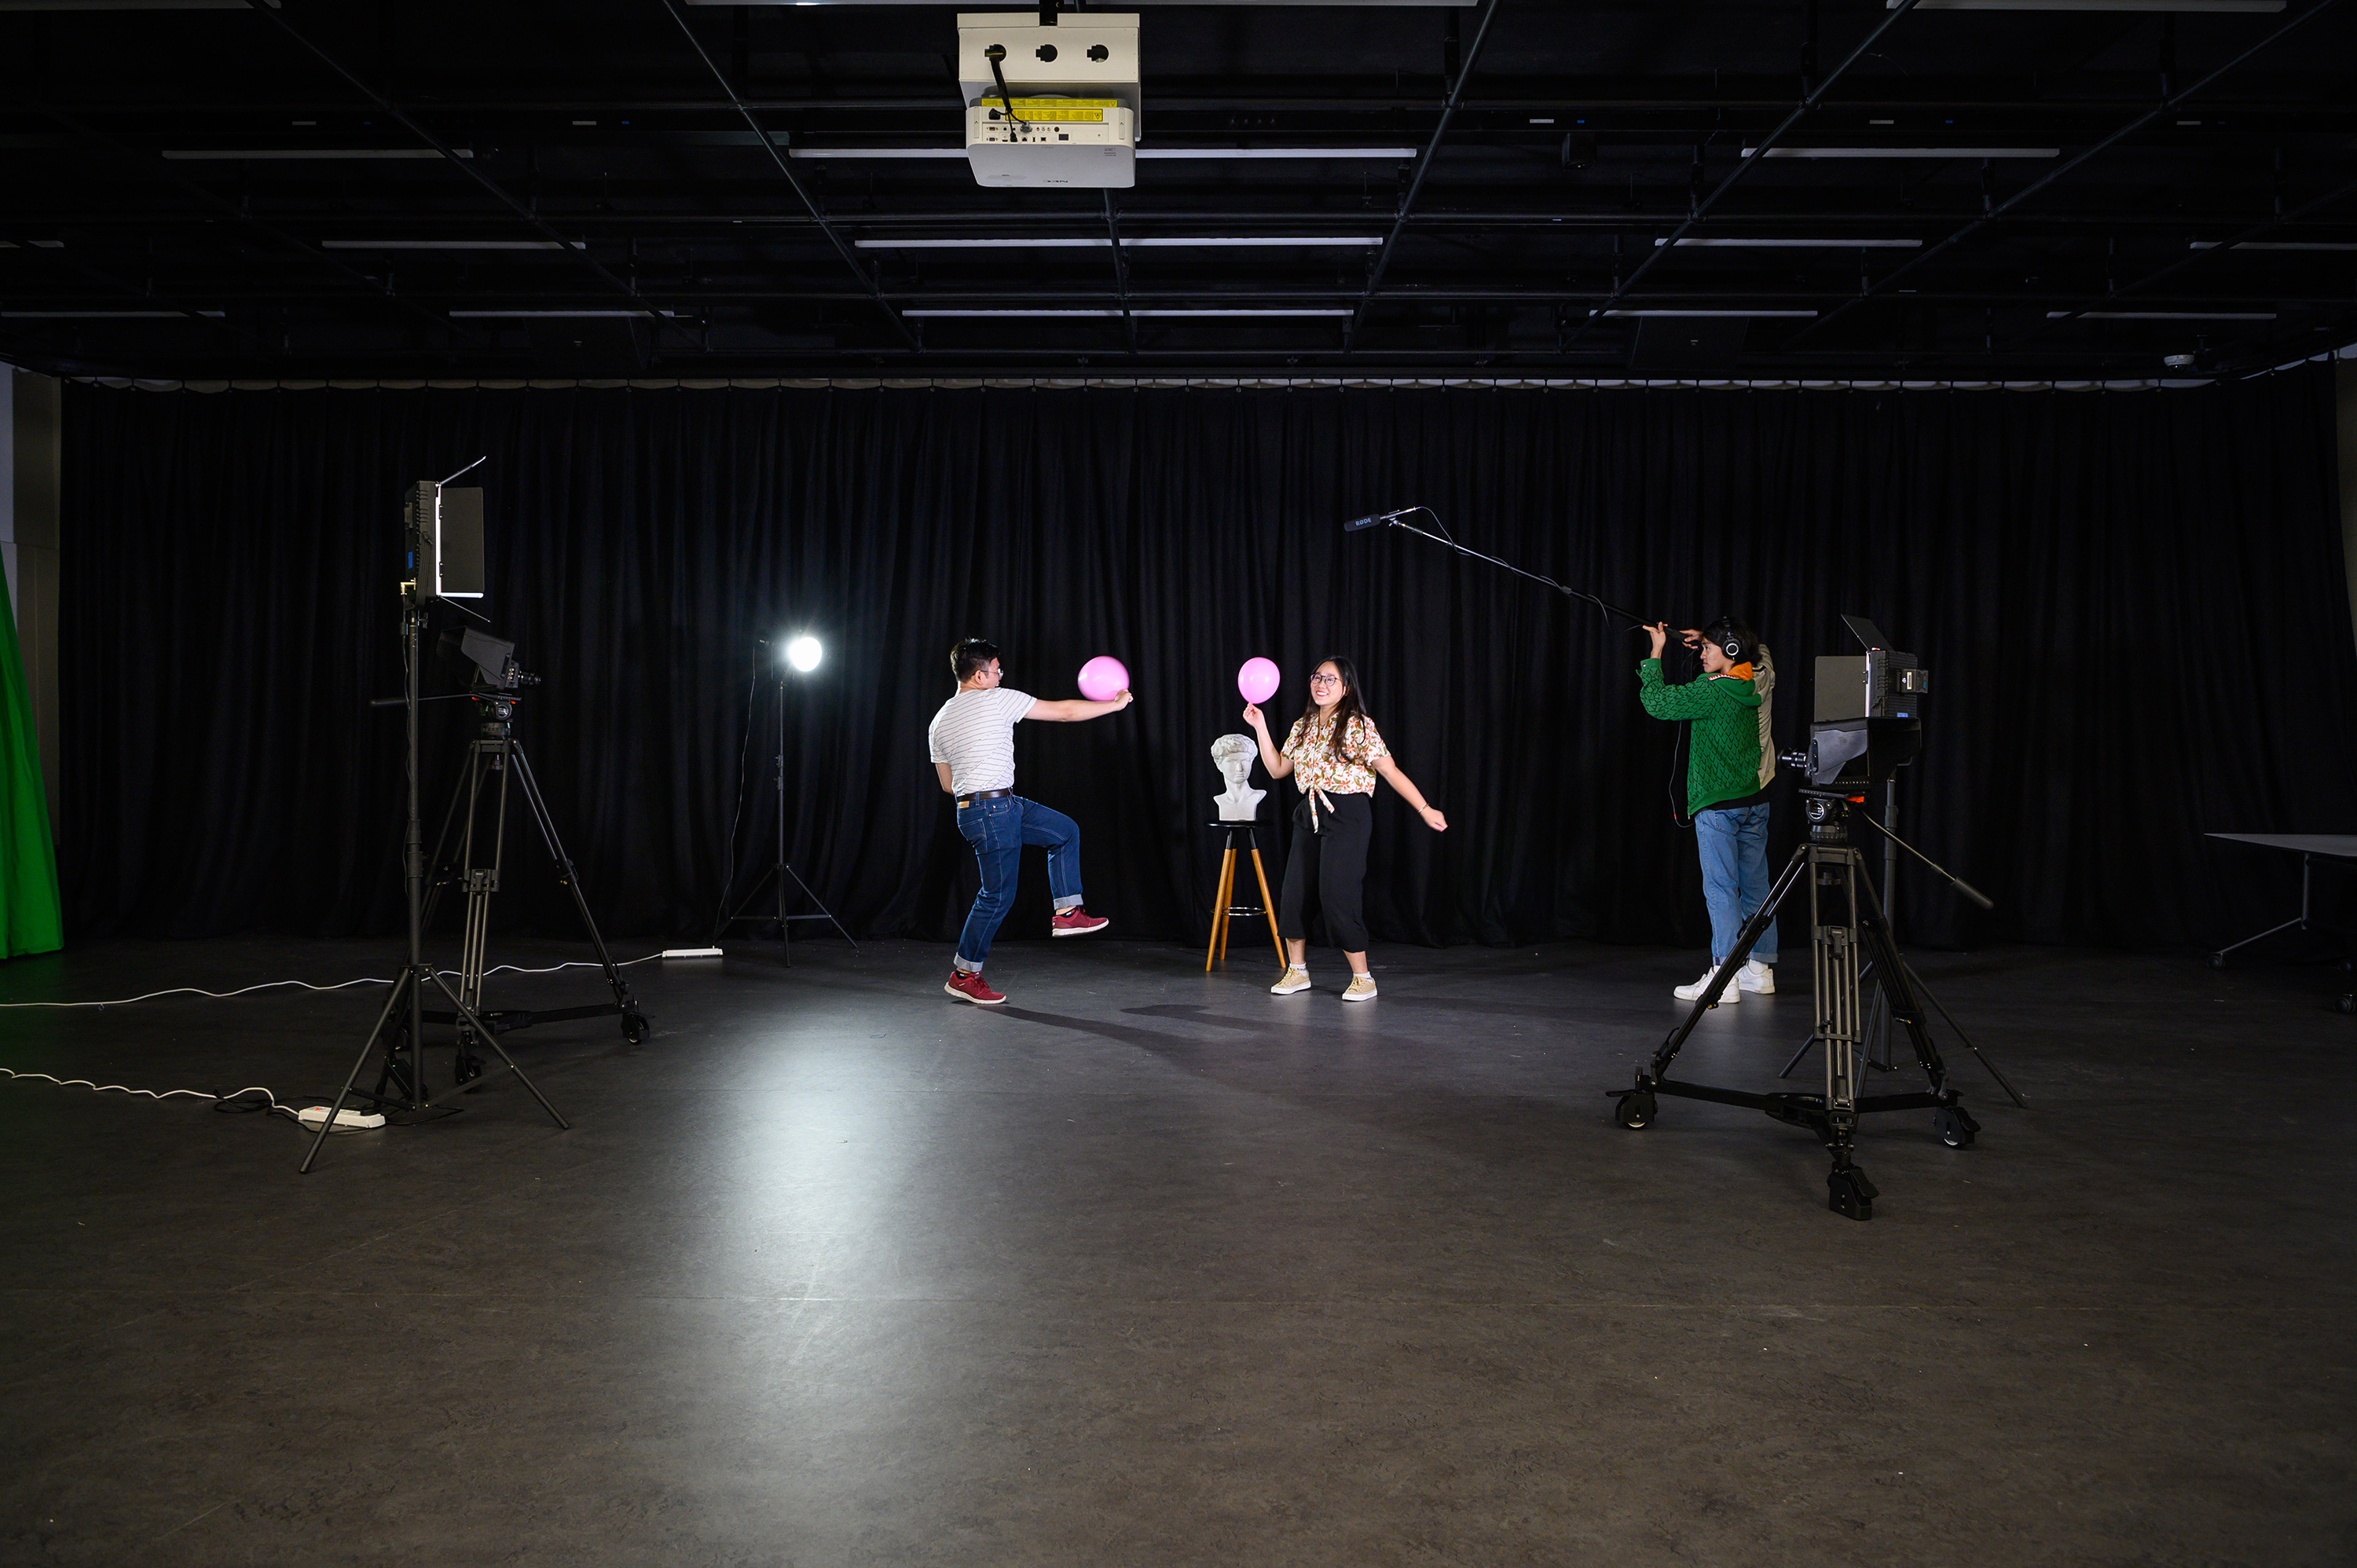 Bachelor of Digital Film and Video focuses on preparing highly-trained graduates for the creative digital future.